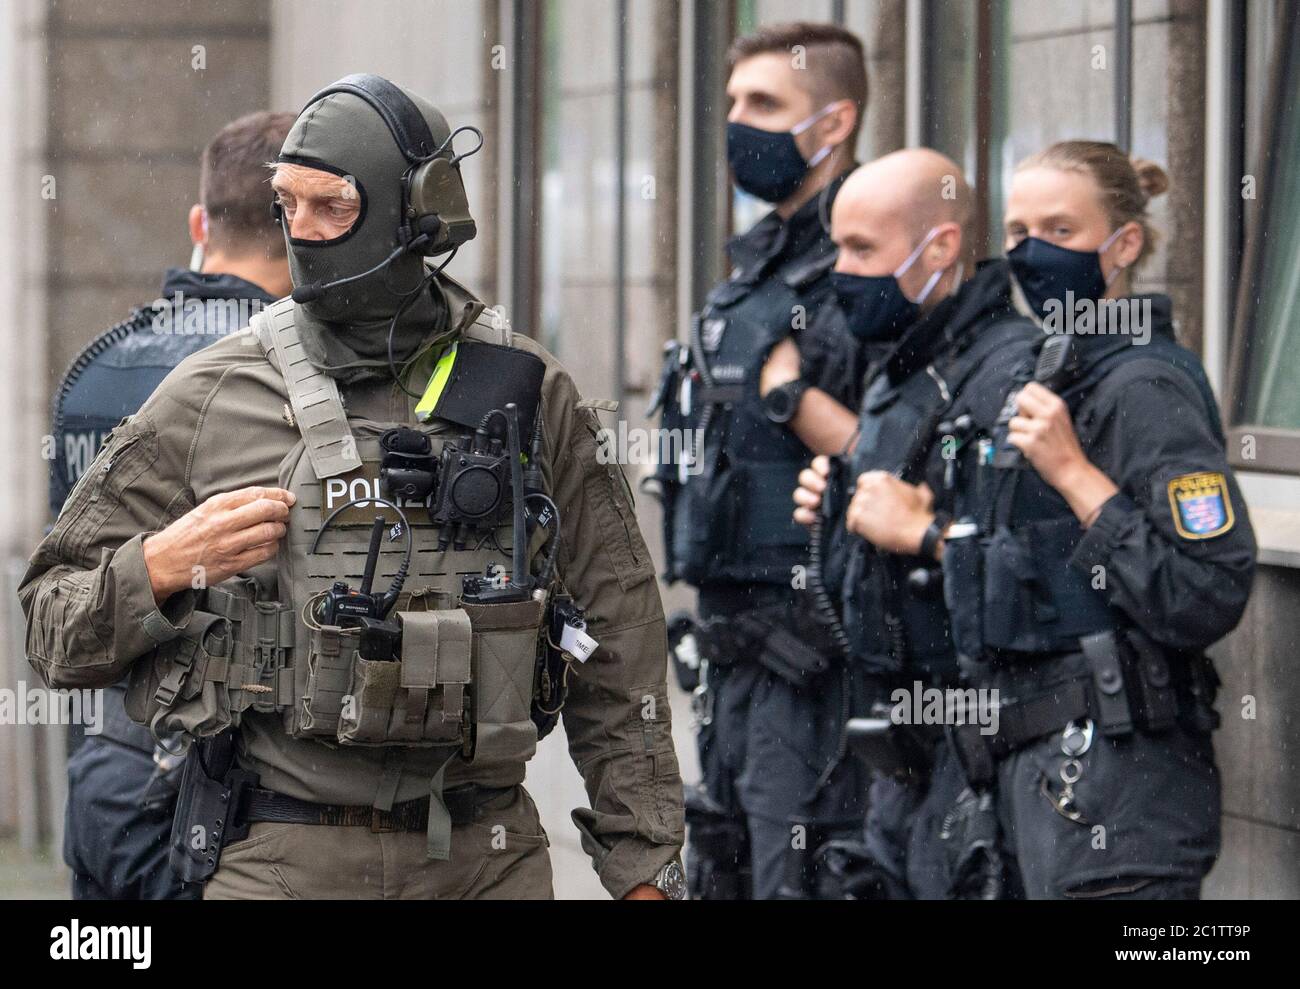 16 June 2020, Hessen, Frankfurt/Main: Officers of the Special Operations Command (SEK) and police officers secure the courthouse before the arrival of the accused. Under high security precautions, the trial of the alleged main perpetrator 46-year-old Stephan E. and his alleged aide Markus H. takes place before the State Security Senate of the Higher Regional Court. Stephan E. is said to have shot the North Hessian District President Lübcke on his terrace a year ago, because the CDU politician had stood up for refugees. Photo: Boris Roessler/dpa Stock Photo